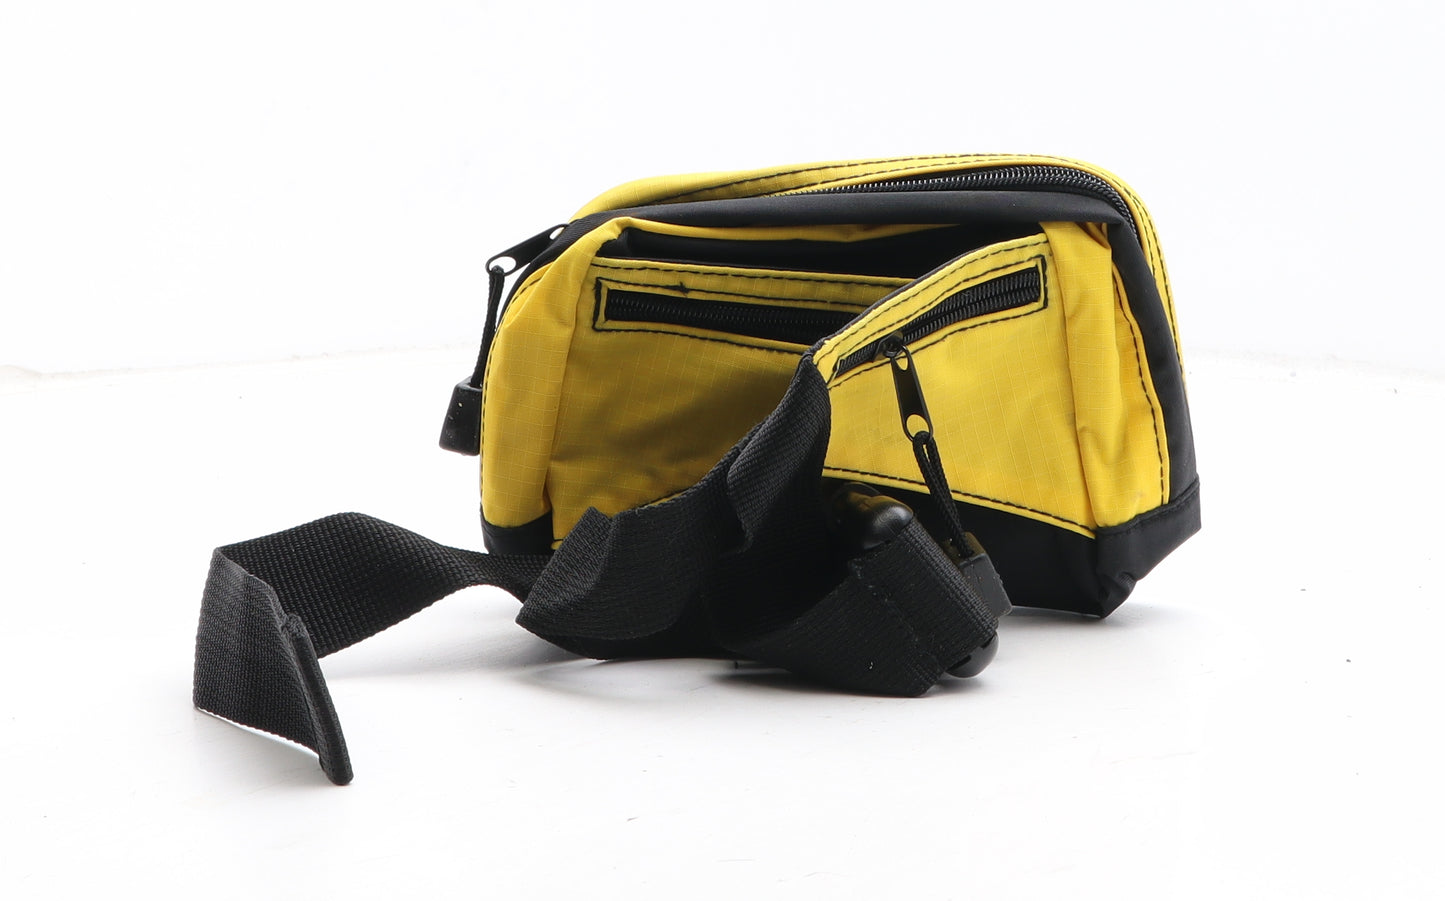 Edition Mens Yellow Polyester Belt Bag & Waist Pack Size Small